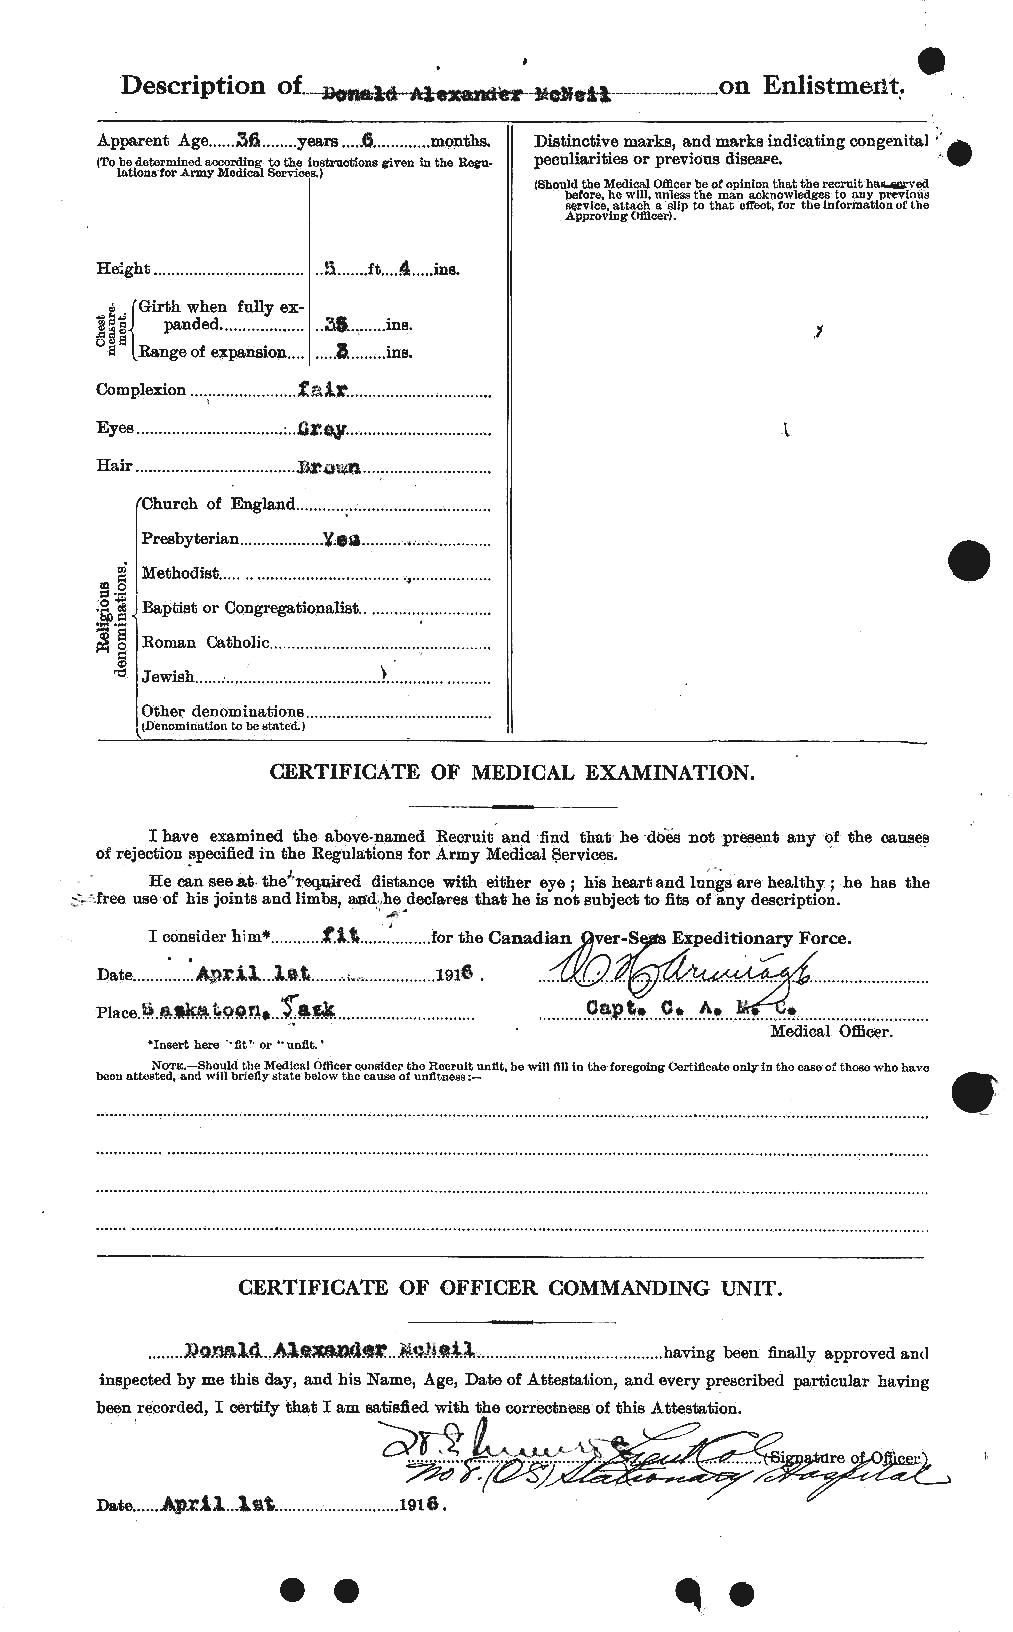 Personnel Records of the First World War - CEF 541790b